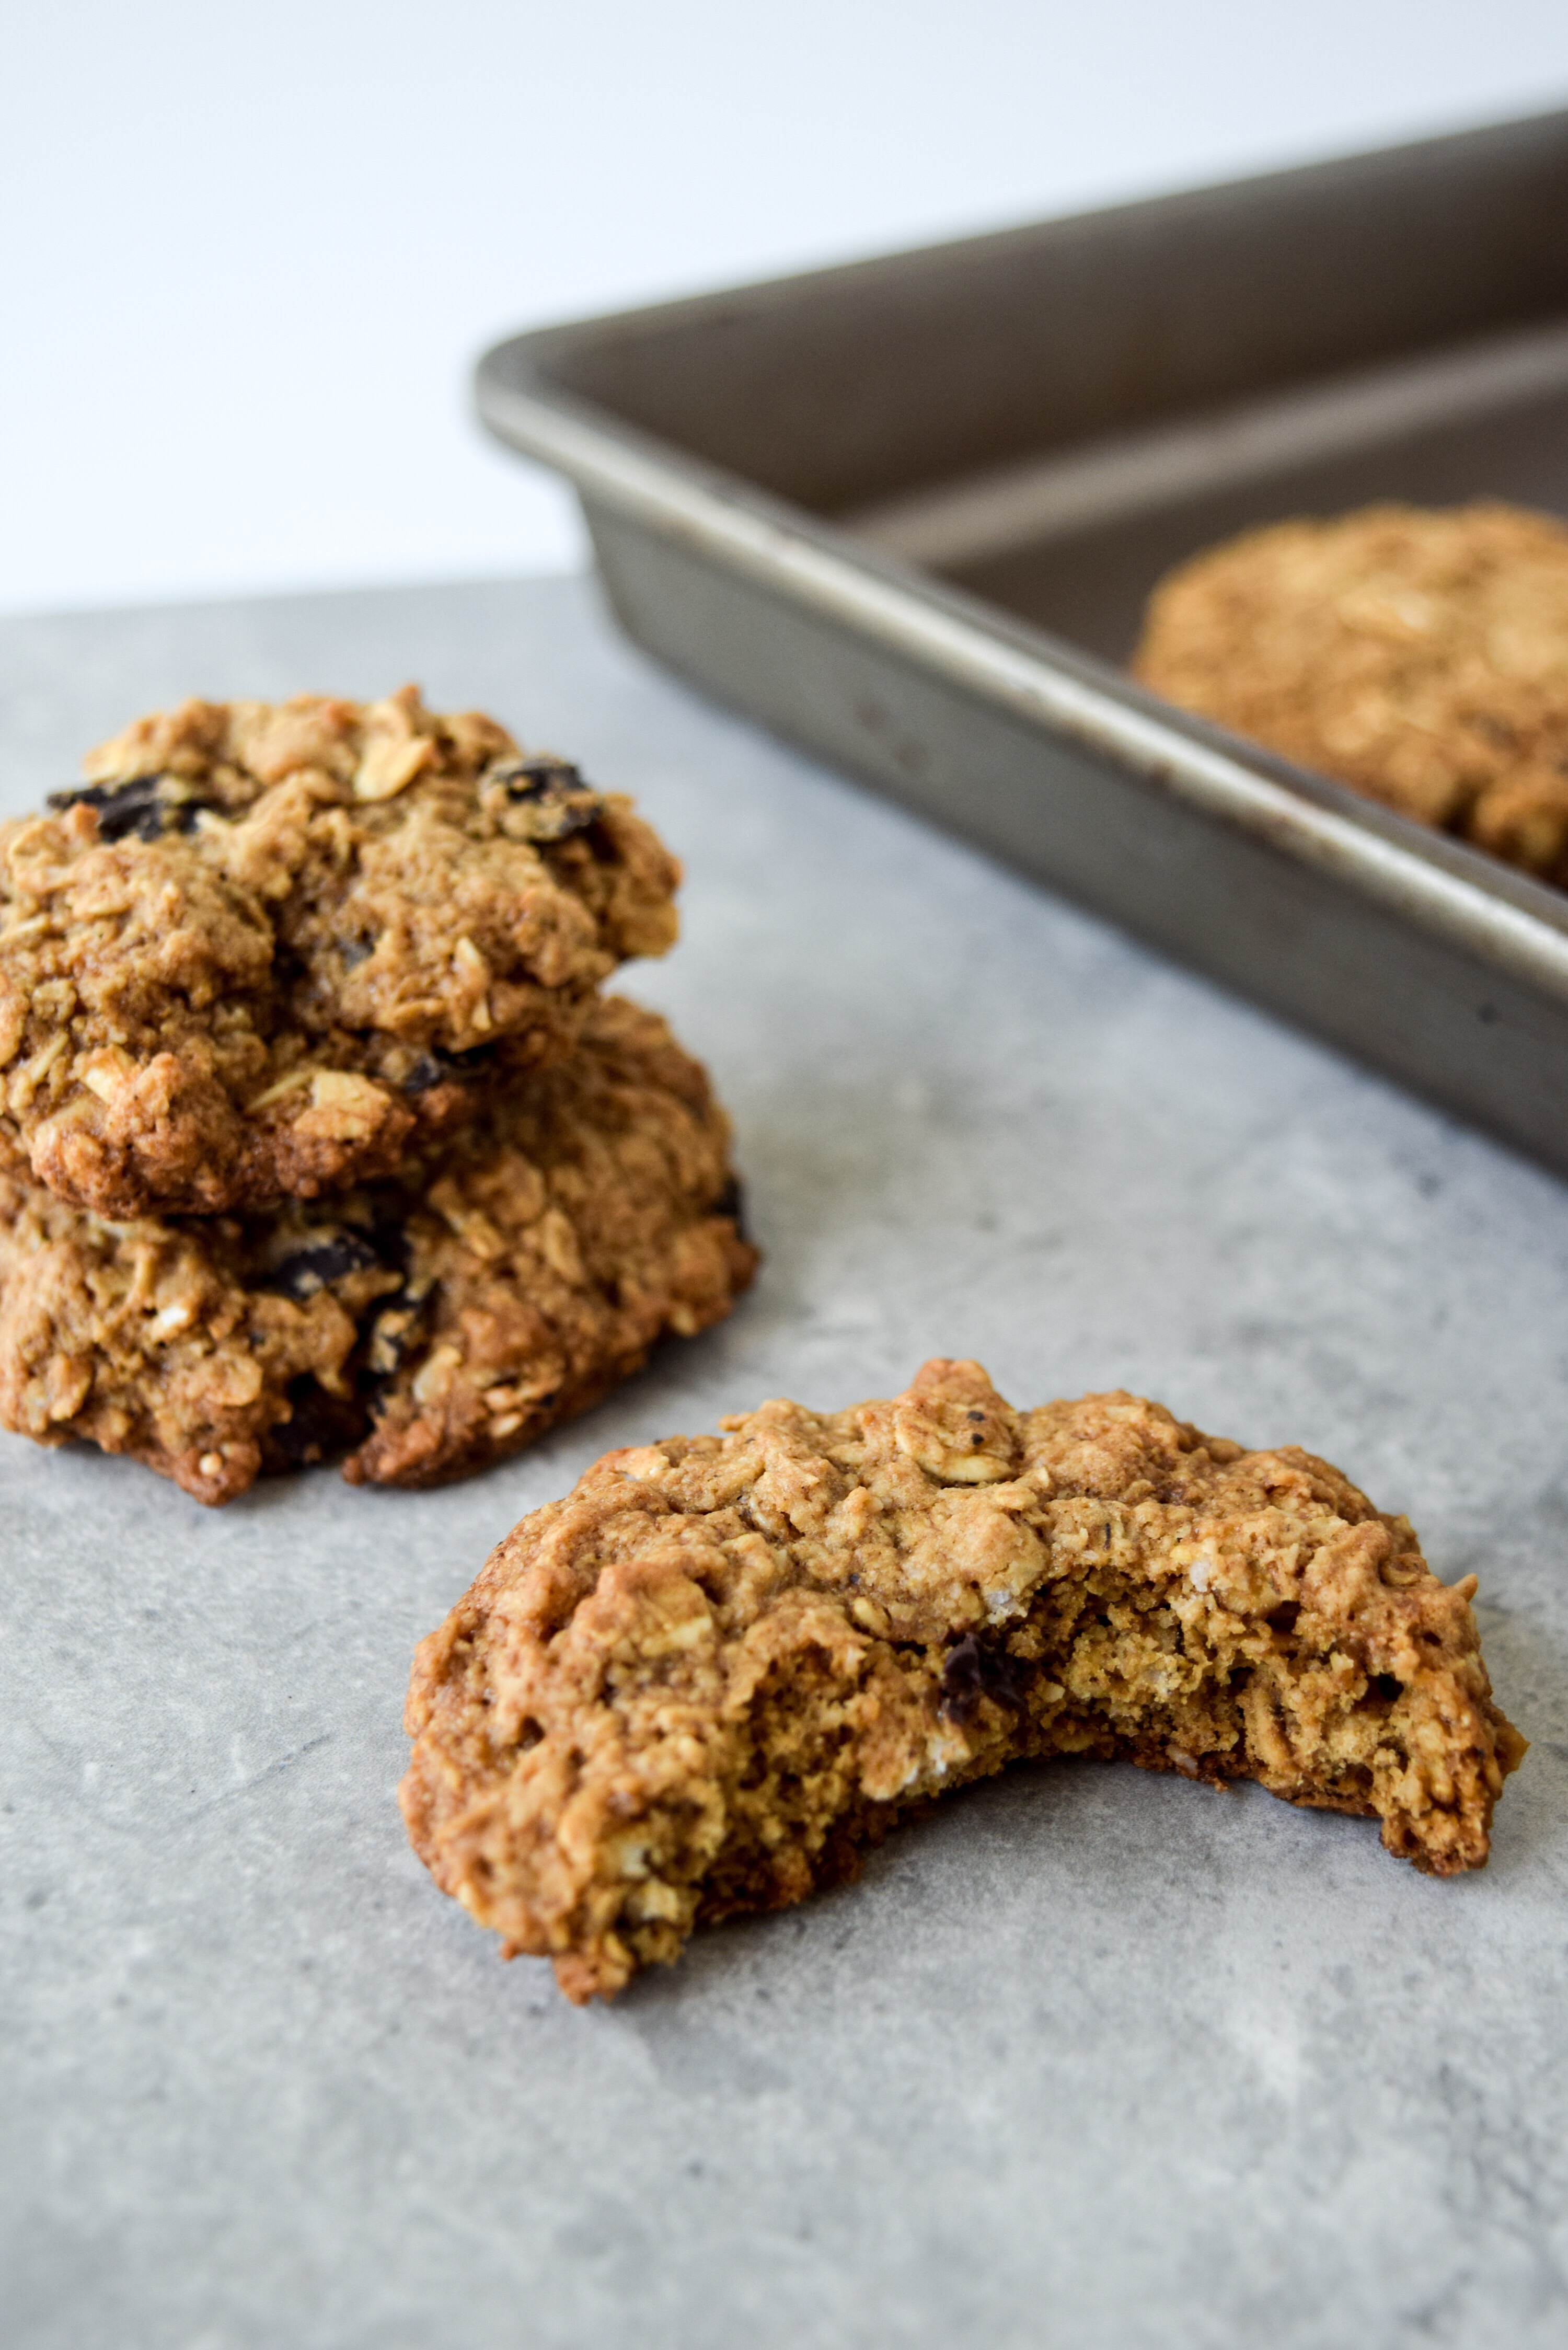 These Healthy Oatmeal Chocolate Chip Cookies are the perfect sweet treat to make this week!